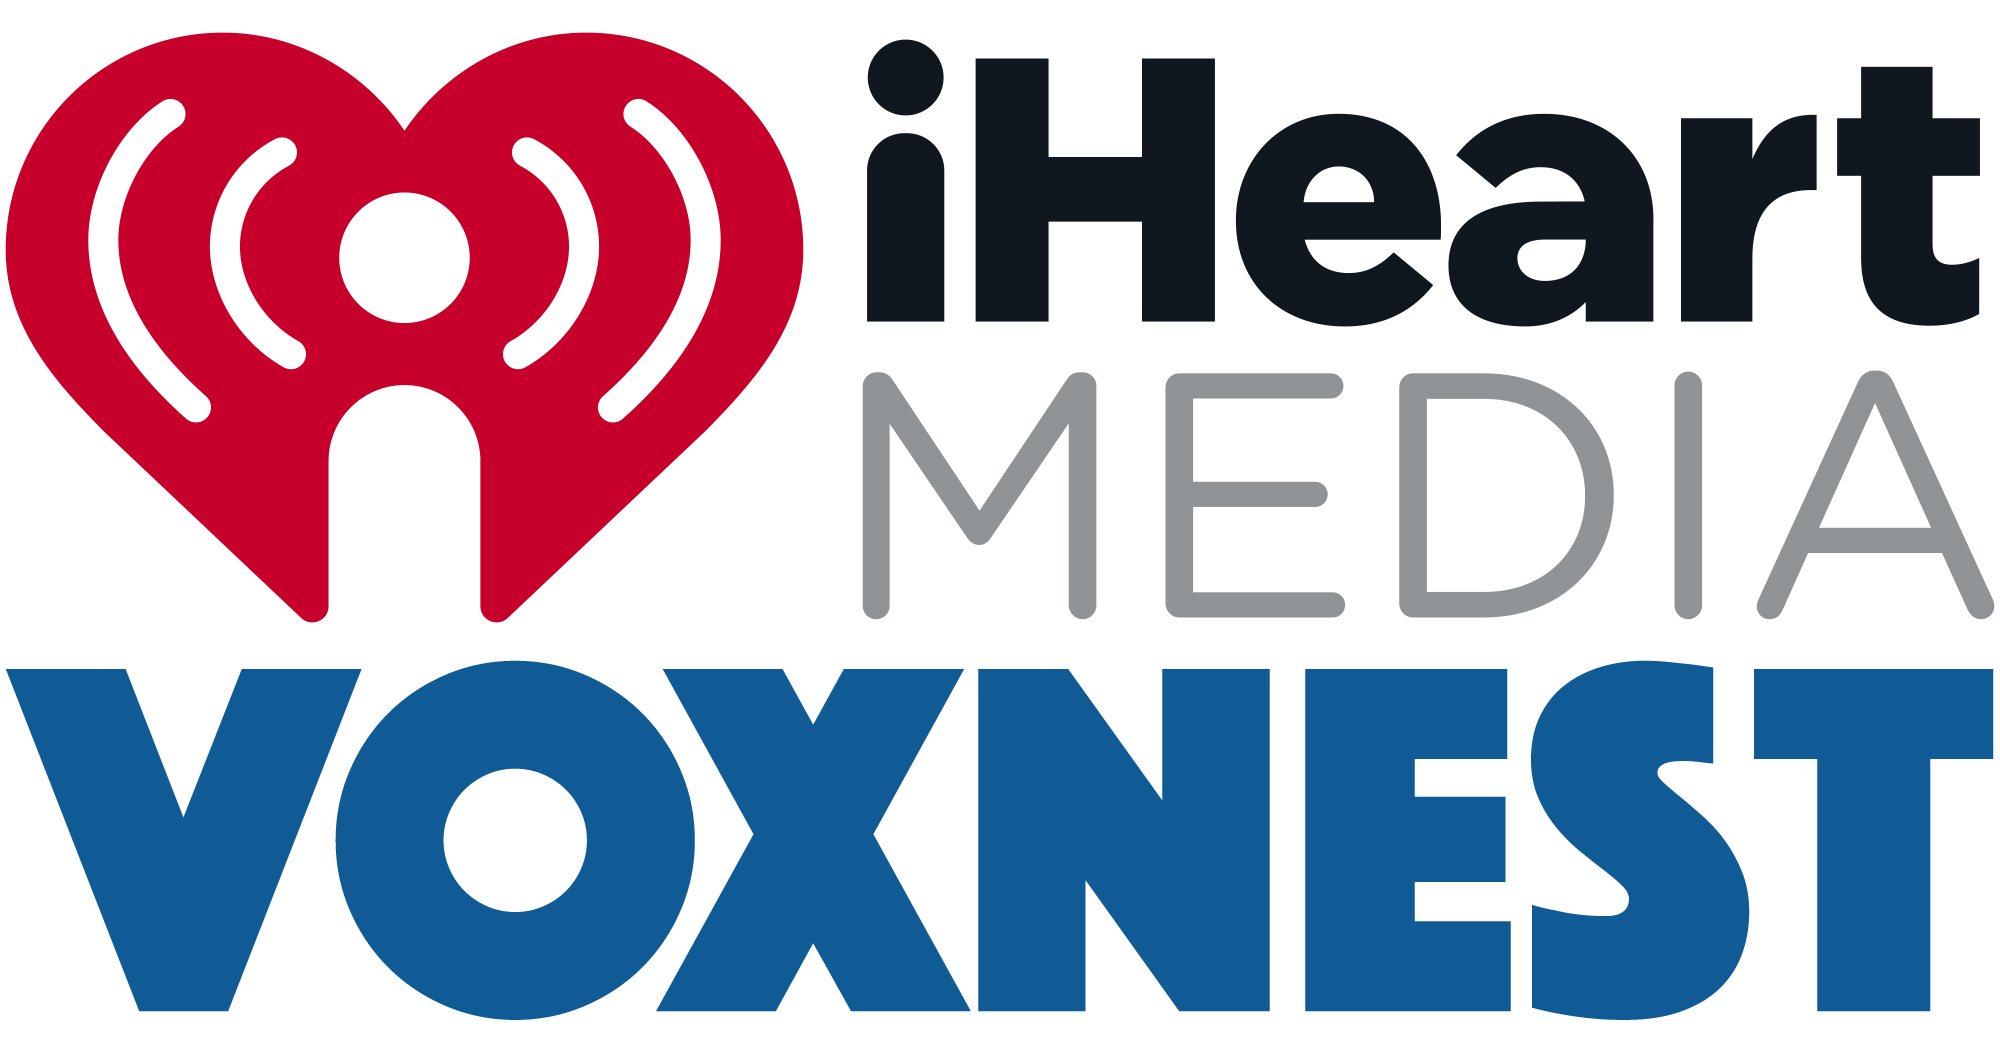 iHeartMedia acquire podcast publishing and advertising platform Voxnest